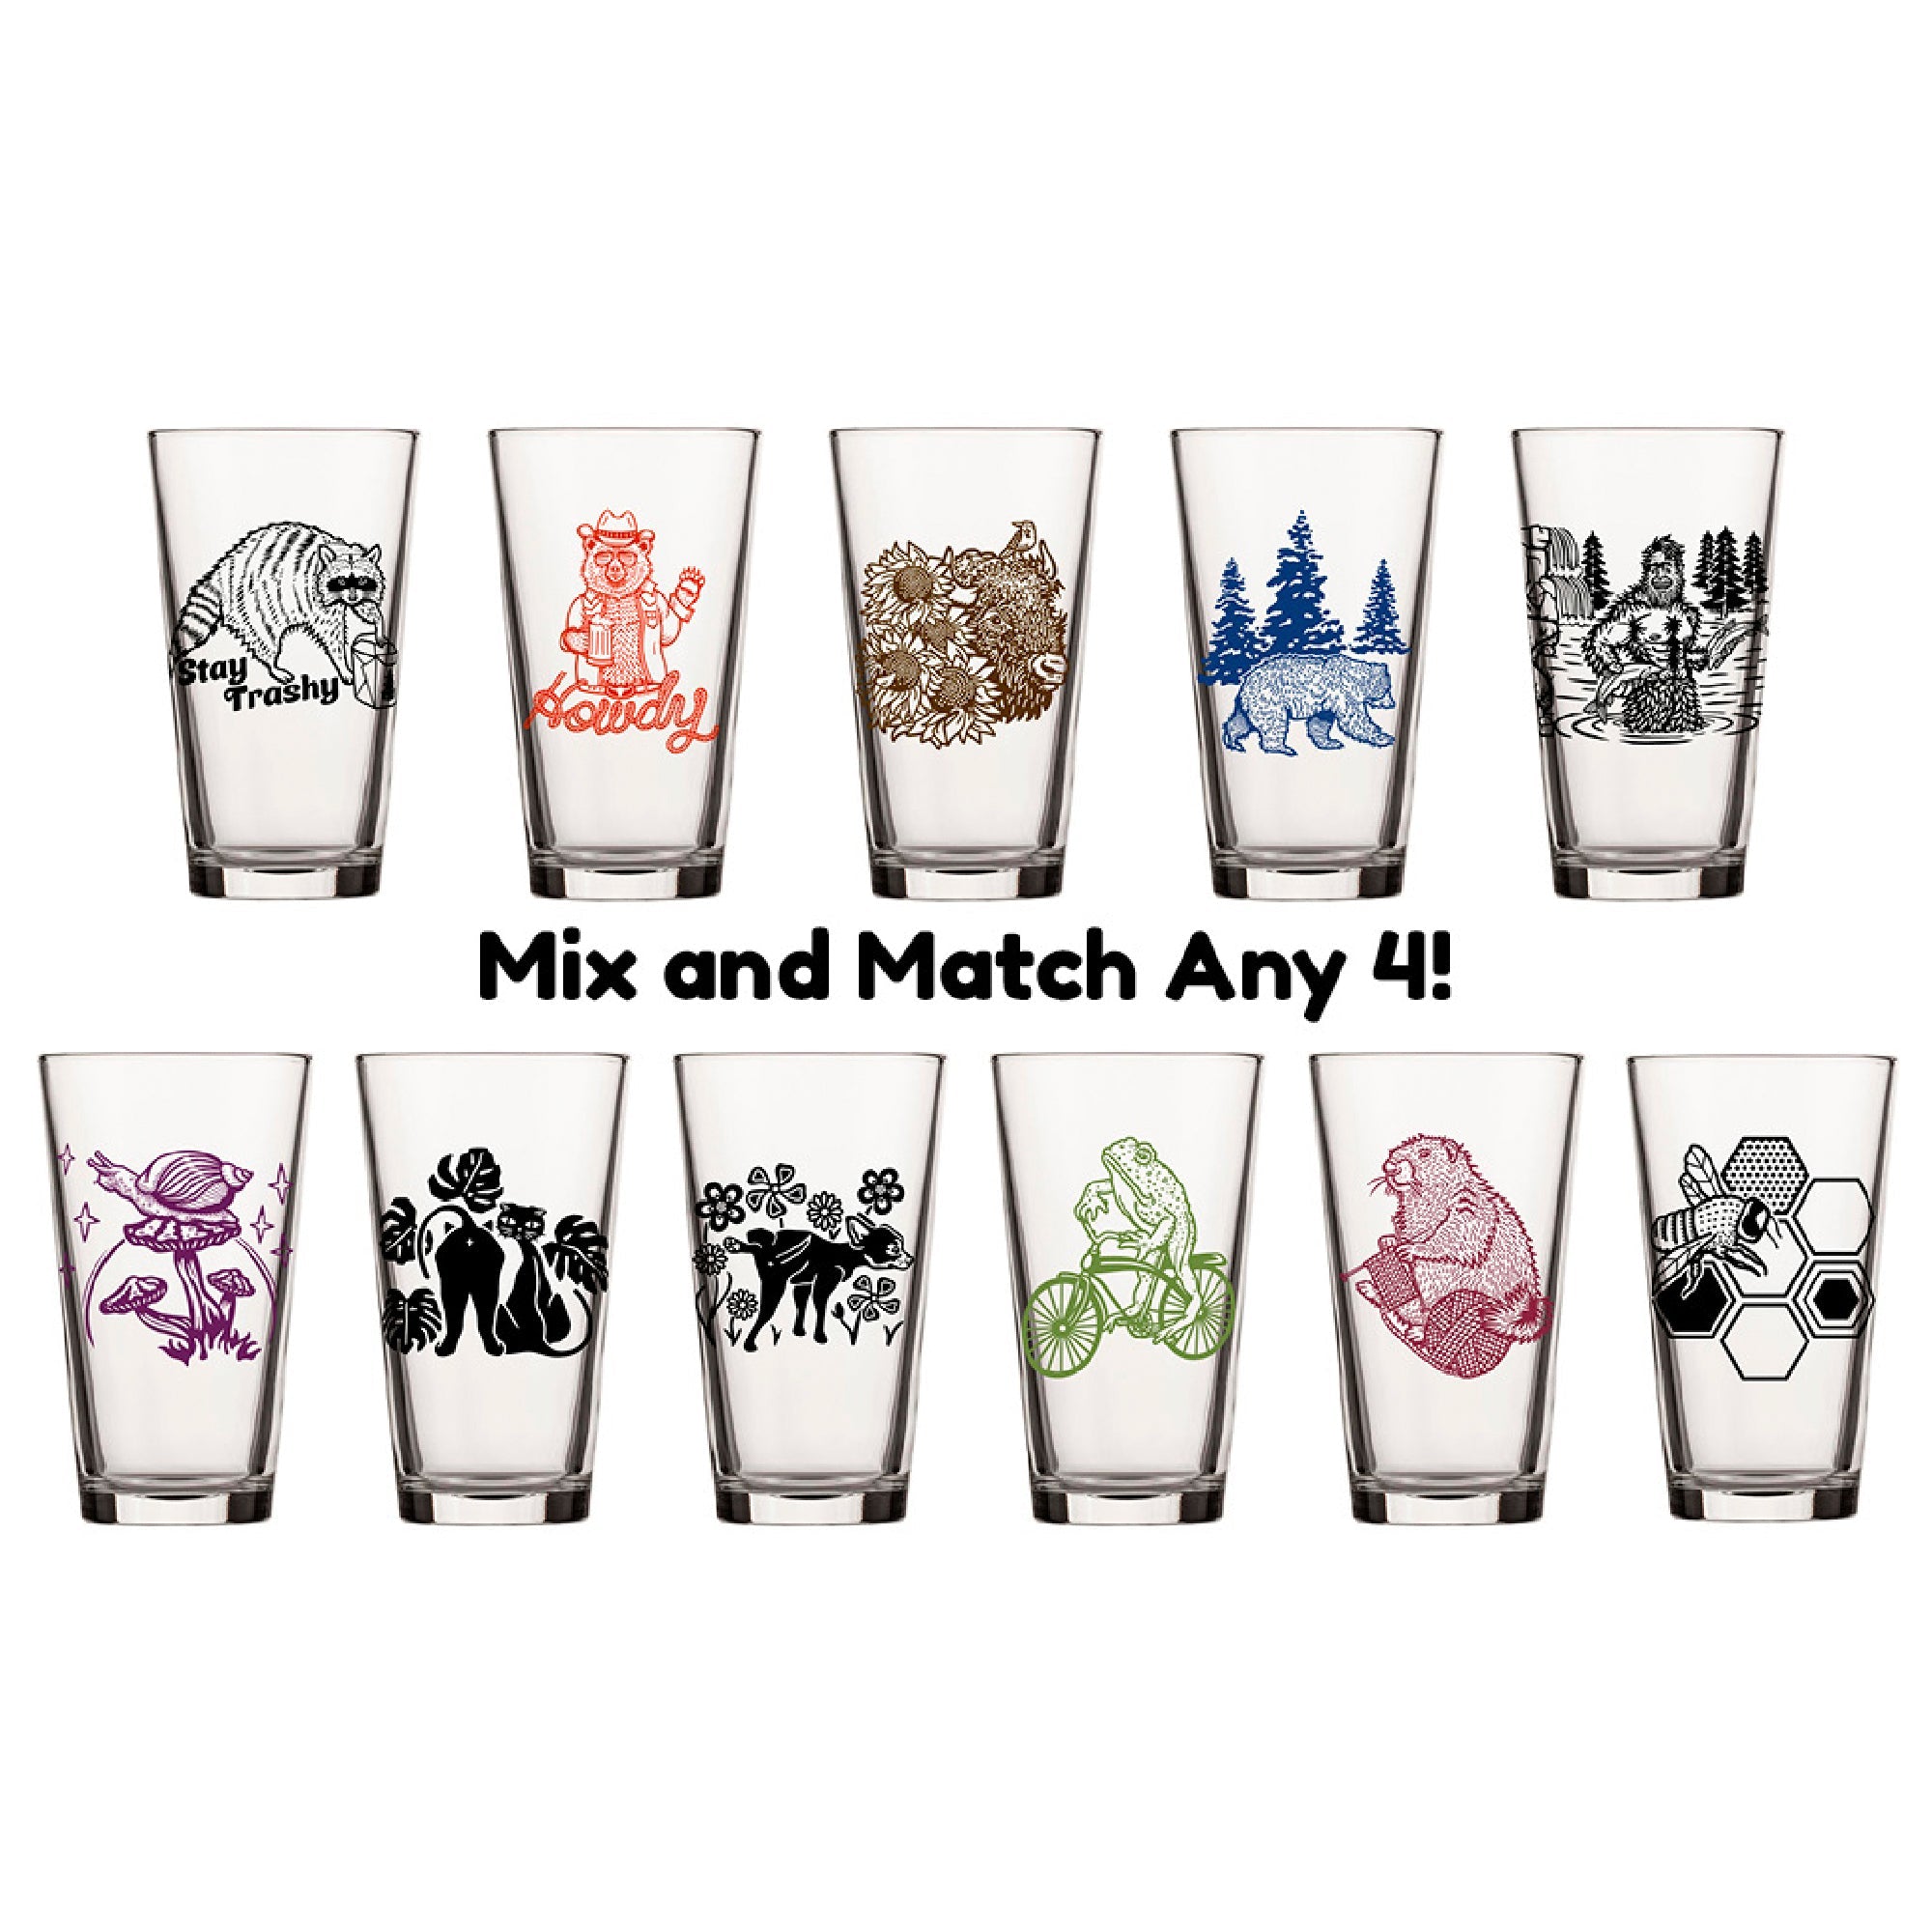 http://www.twolittlefruits.com/cdn/shop/products/pint-glass-sets-mix-and-match-any-4-beer-glasses-564632.jpg?v=1699633691